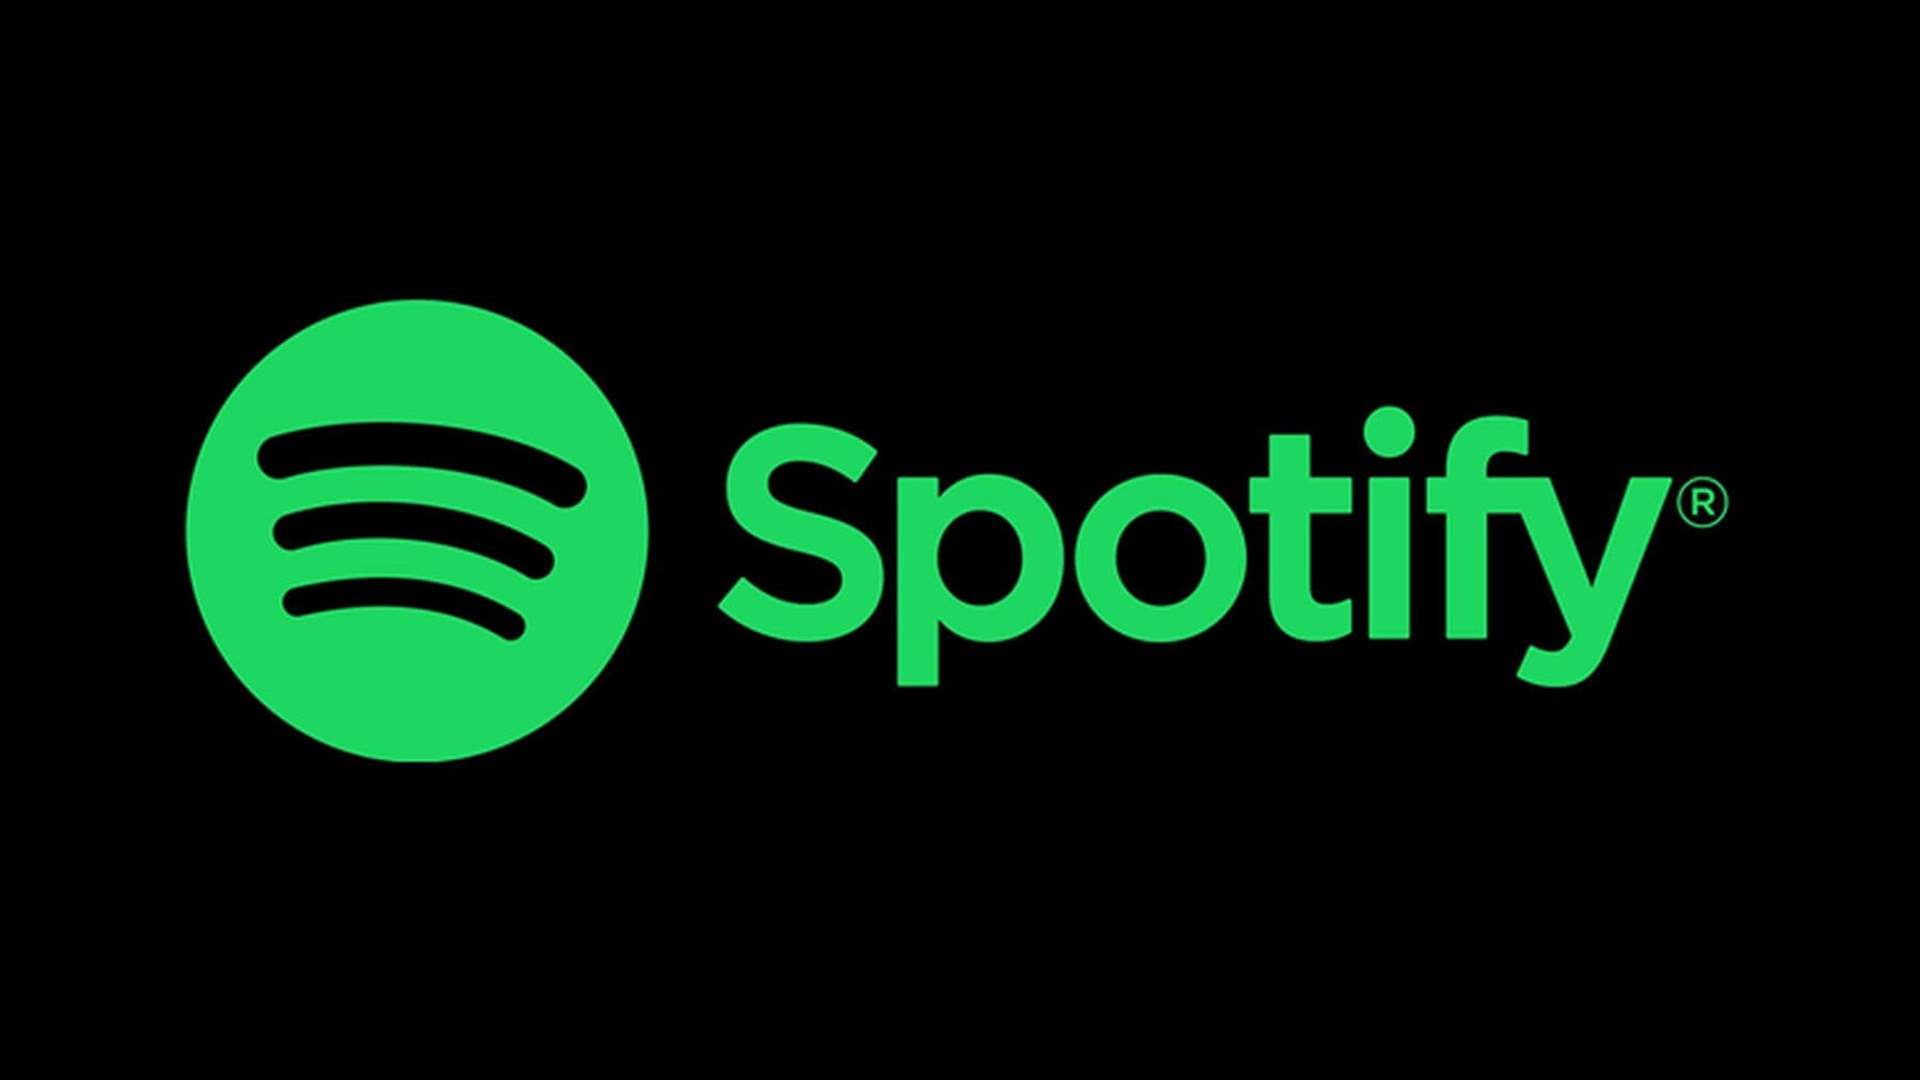 Spotify to cut 6 percent of jobs, content head to depart